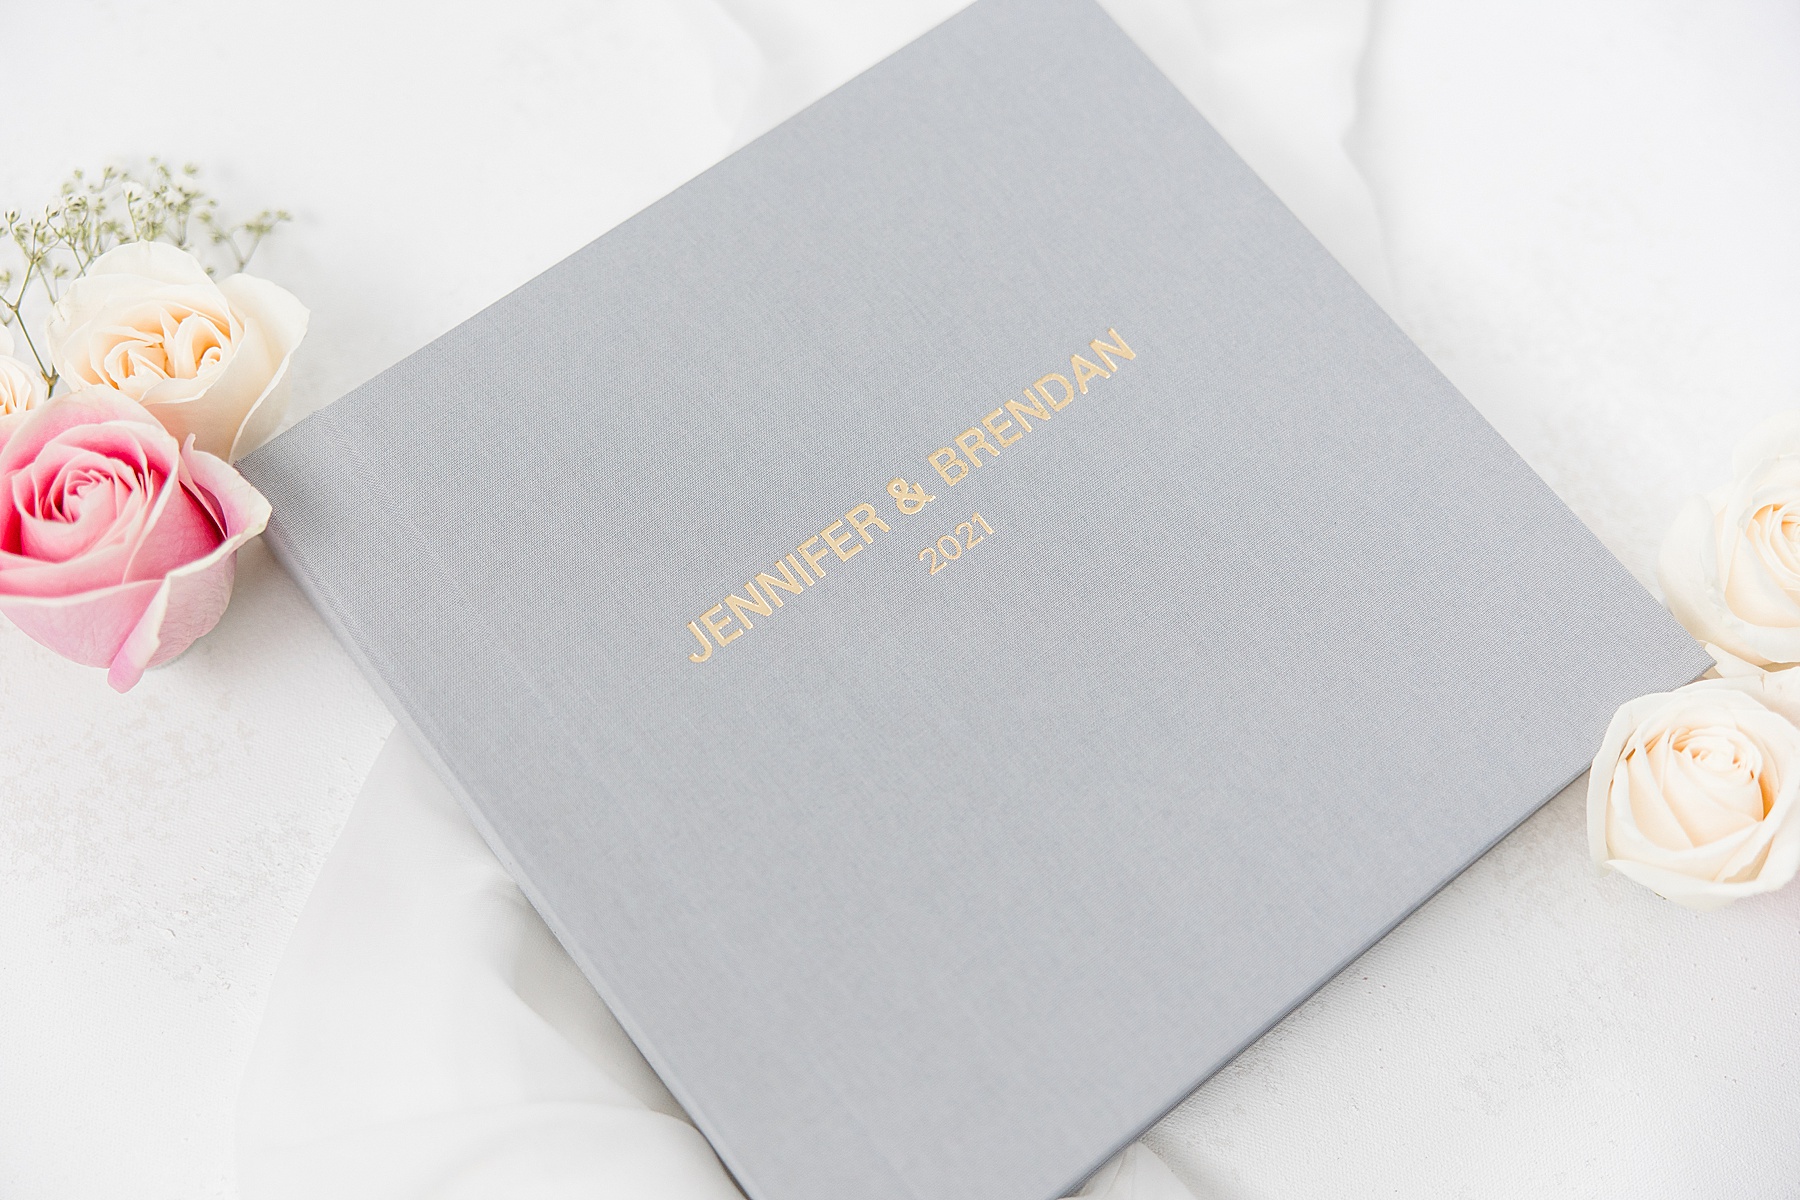 Process of ordering your heirloom wedding album with Brittany Navin Photography